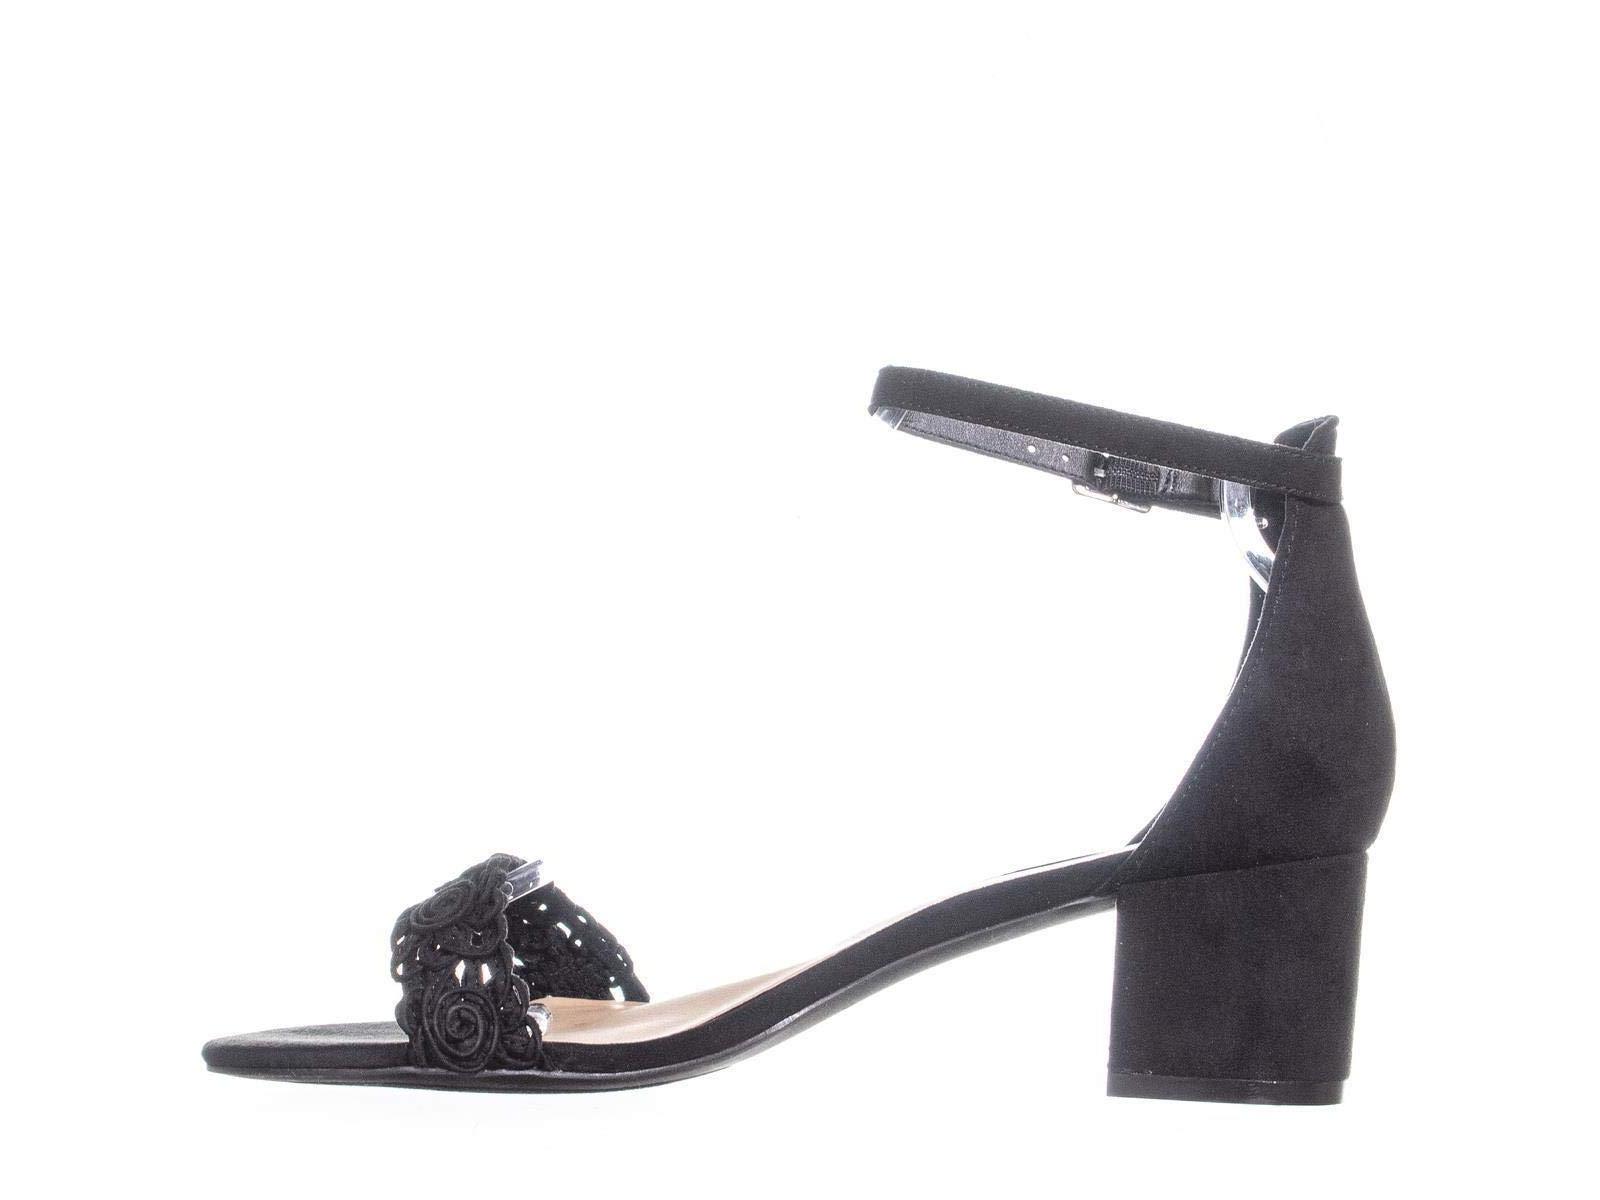 American Rag Womens Brexley Fabric Open Toe Formal Ankle Strap, Black, Size 9.5 - image 1 of 5